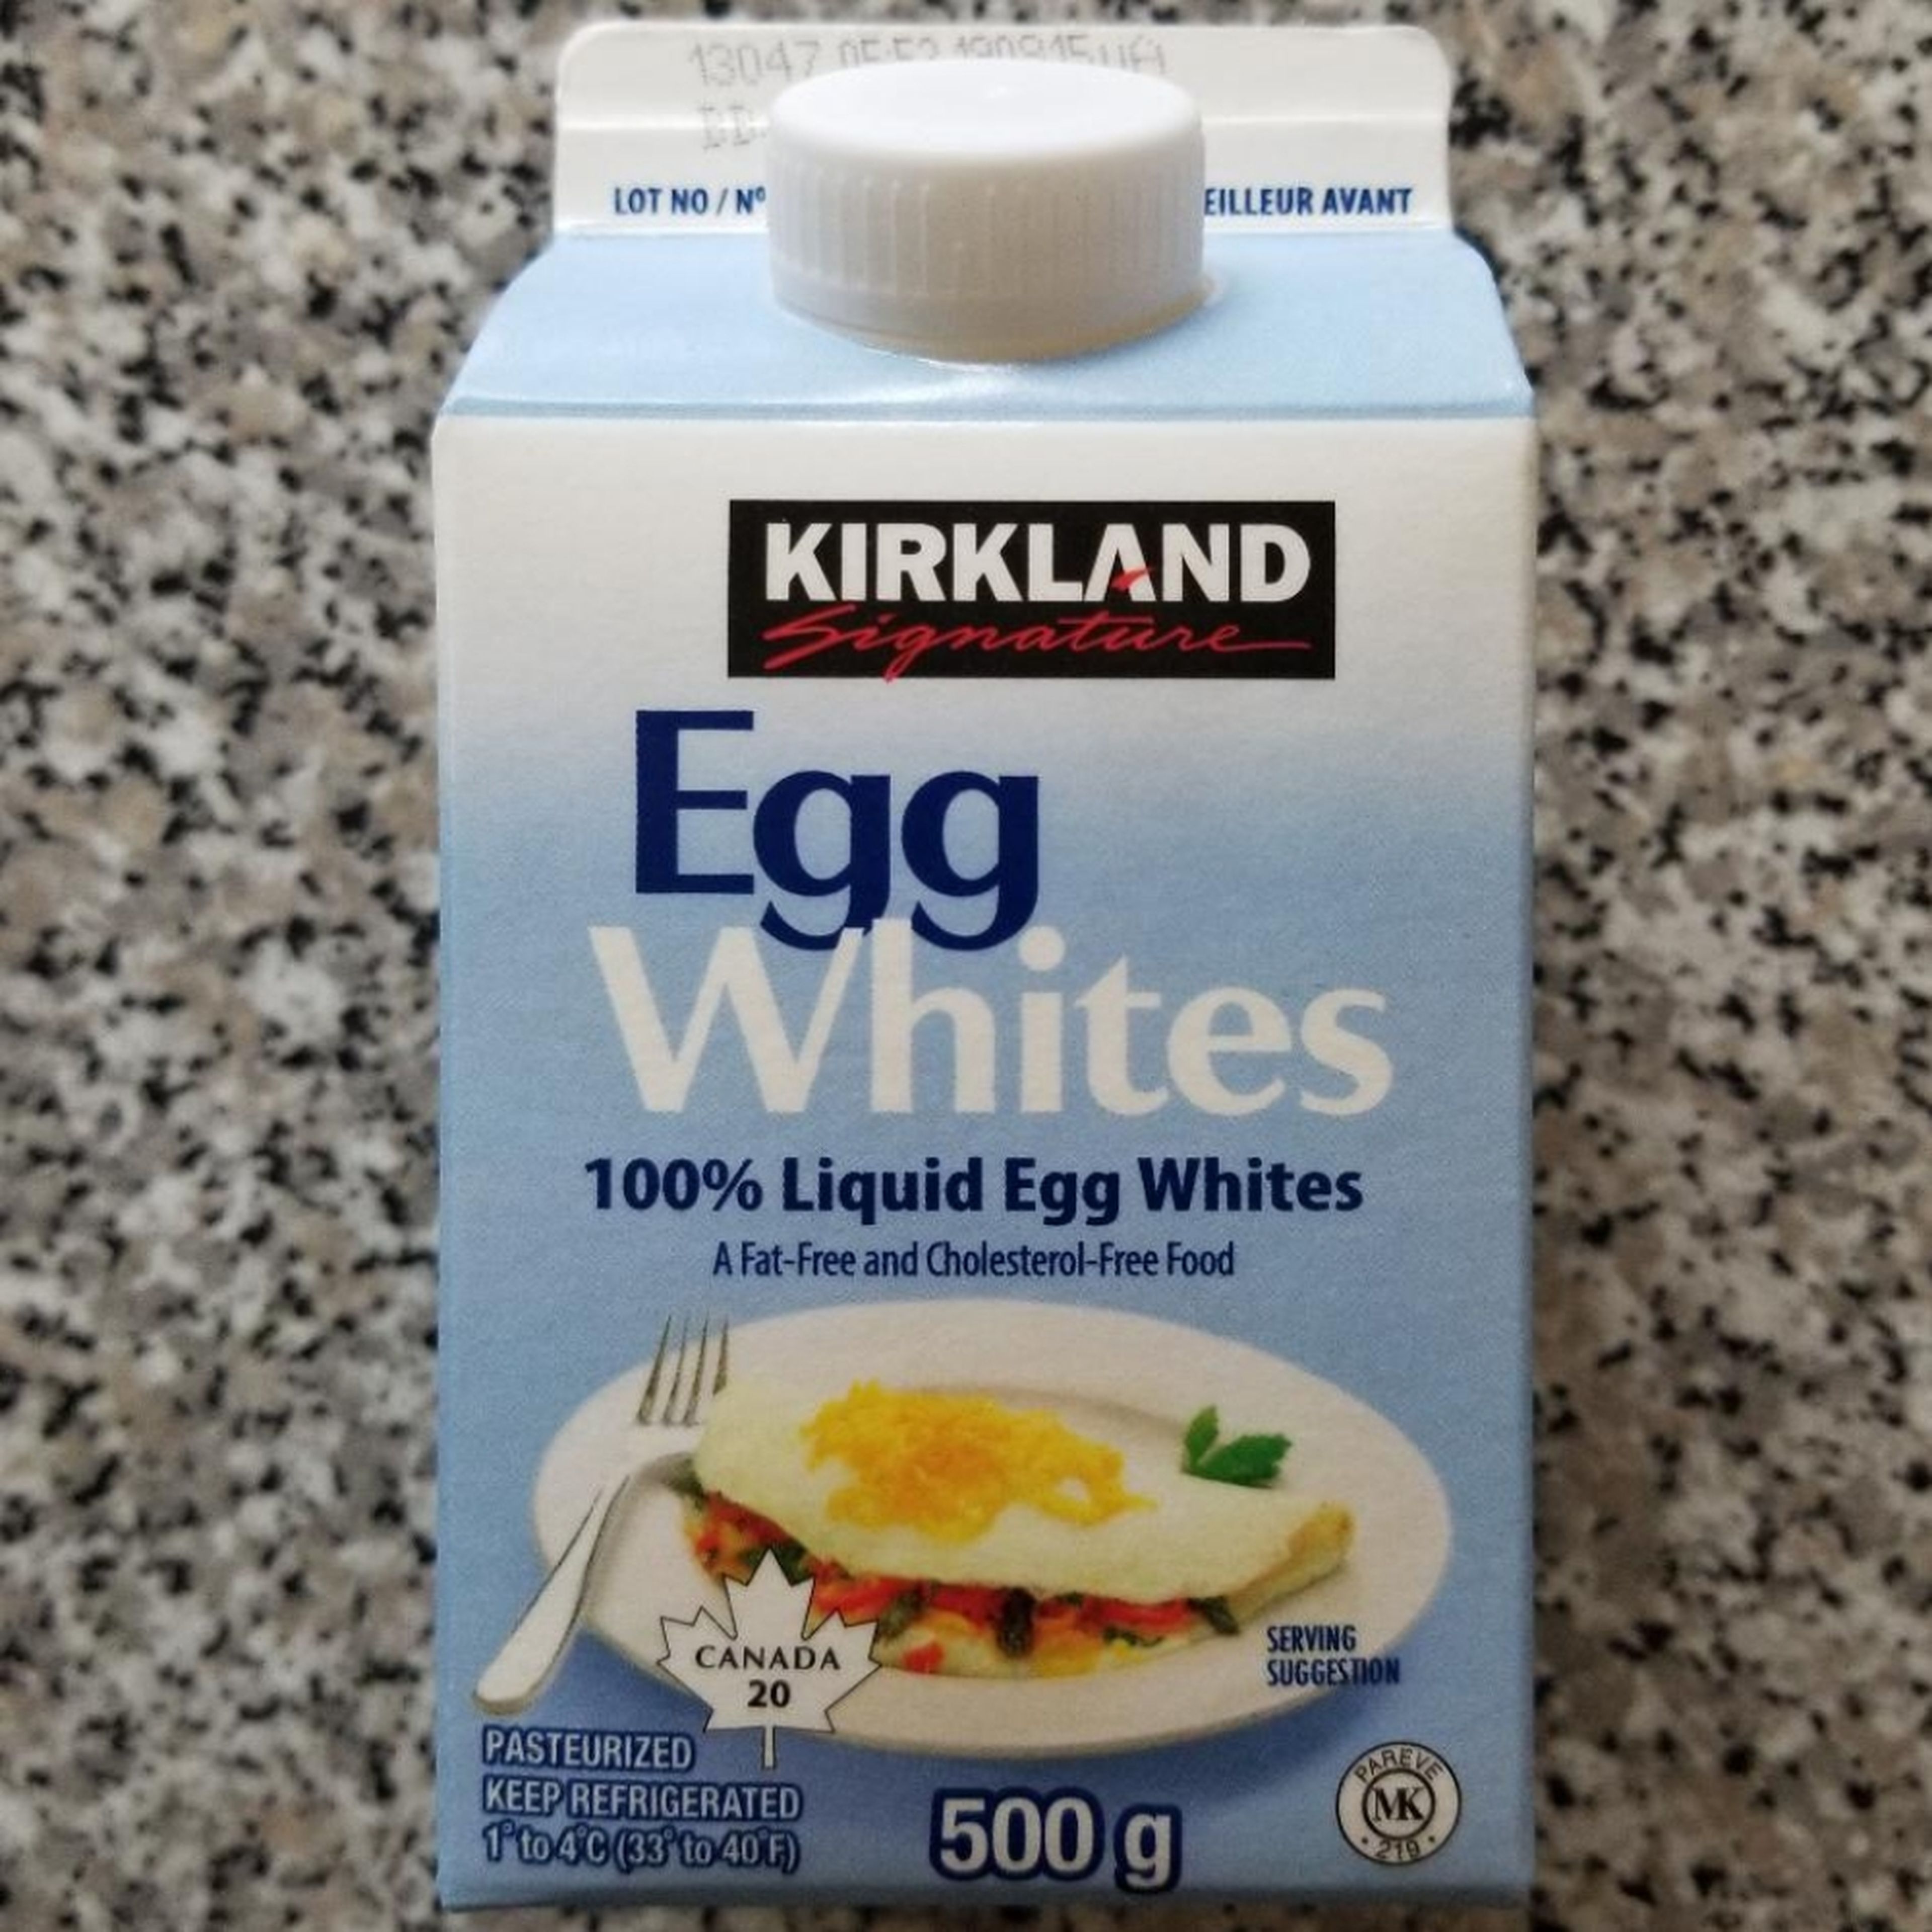 For the egg whites, I generally use the Kirkland brand available in packs of 4 from Costco. Given the amount of egg whites needed for the recipe, separating them manually from whole eggs would be too time consuming (and that's a lot of egg yolks to make mayonnaise from)! Just use the boxed egg whites.